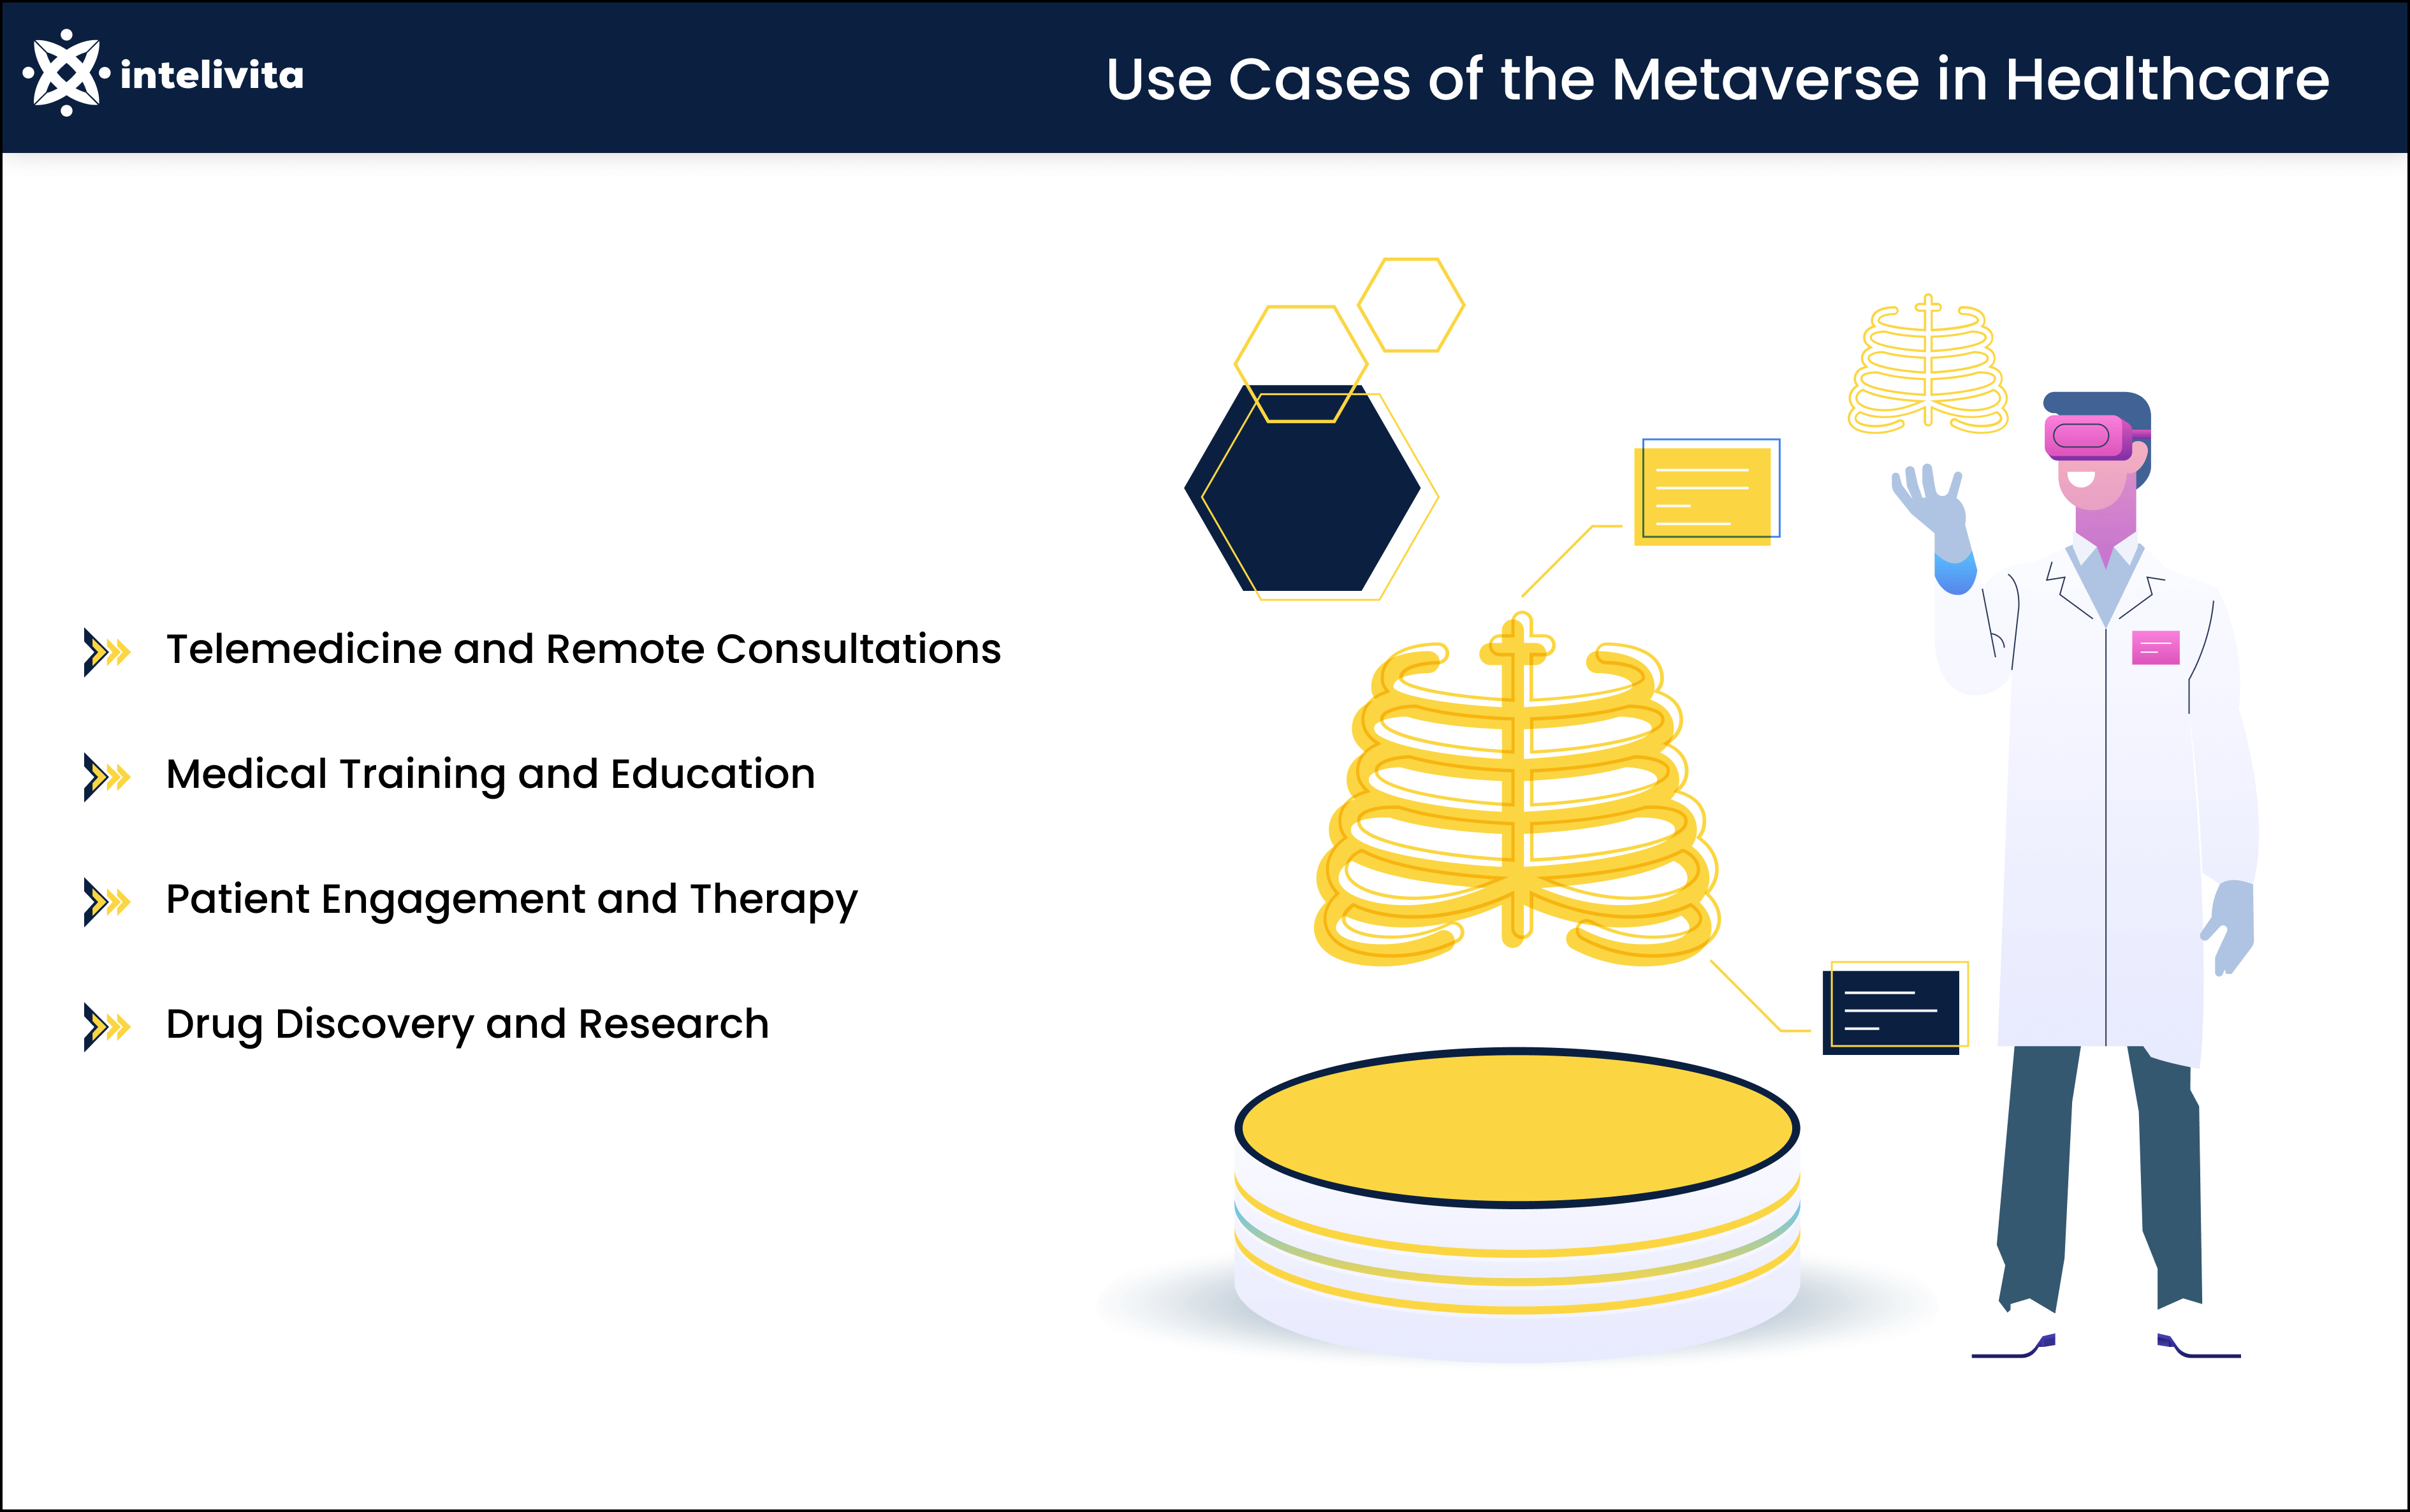 Metaverse use cases - Which industries could the metaverse impact? 